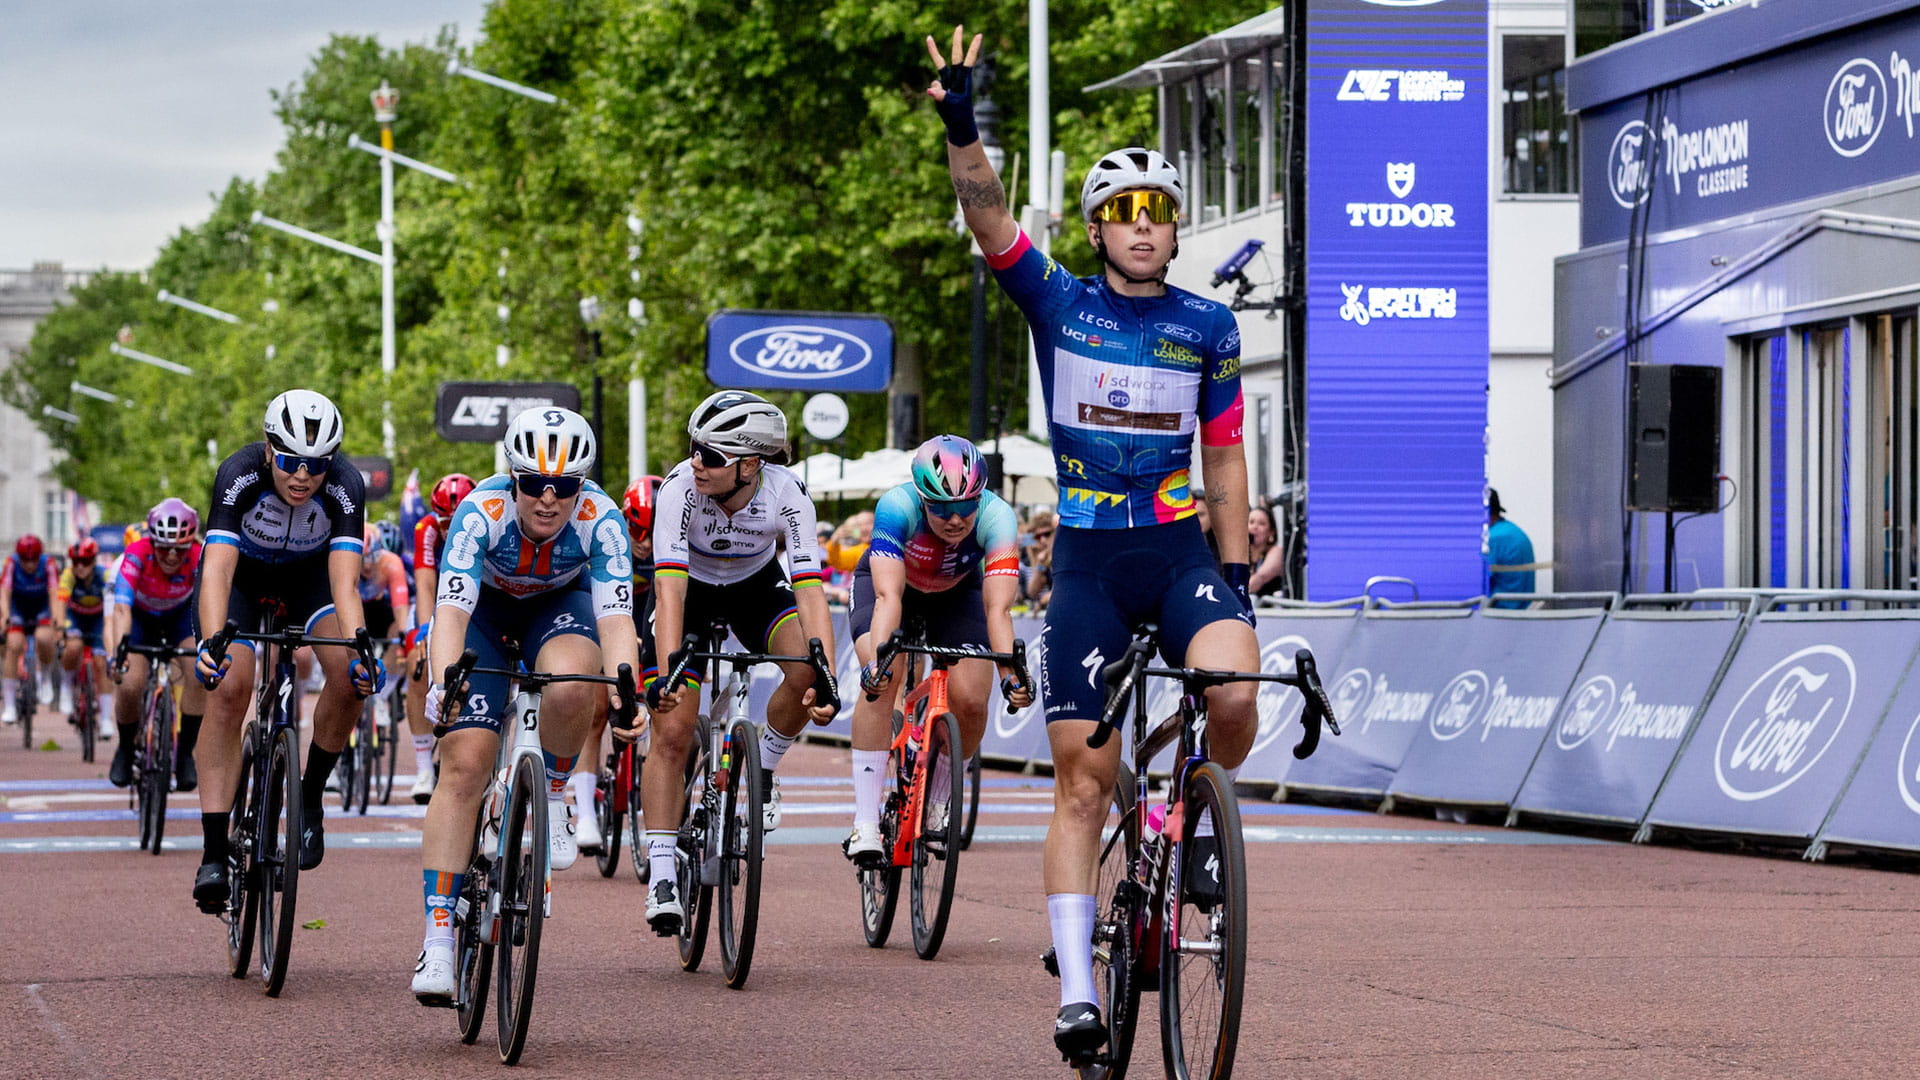 Lorena Wiebes (NED) of Team SD Worx Protime (NED) celebrates after crossing the finish line after winning Stage Three of the Ford RideLondon Classique on Sunday 26th May 2024.